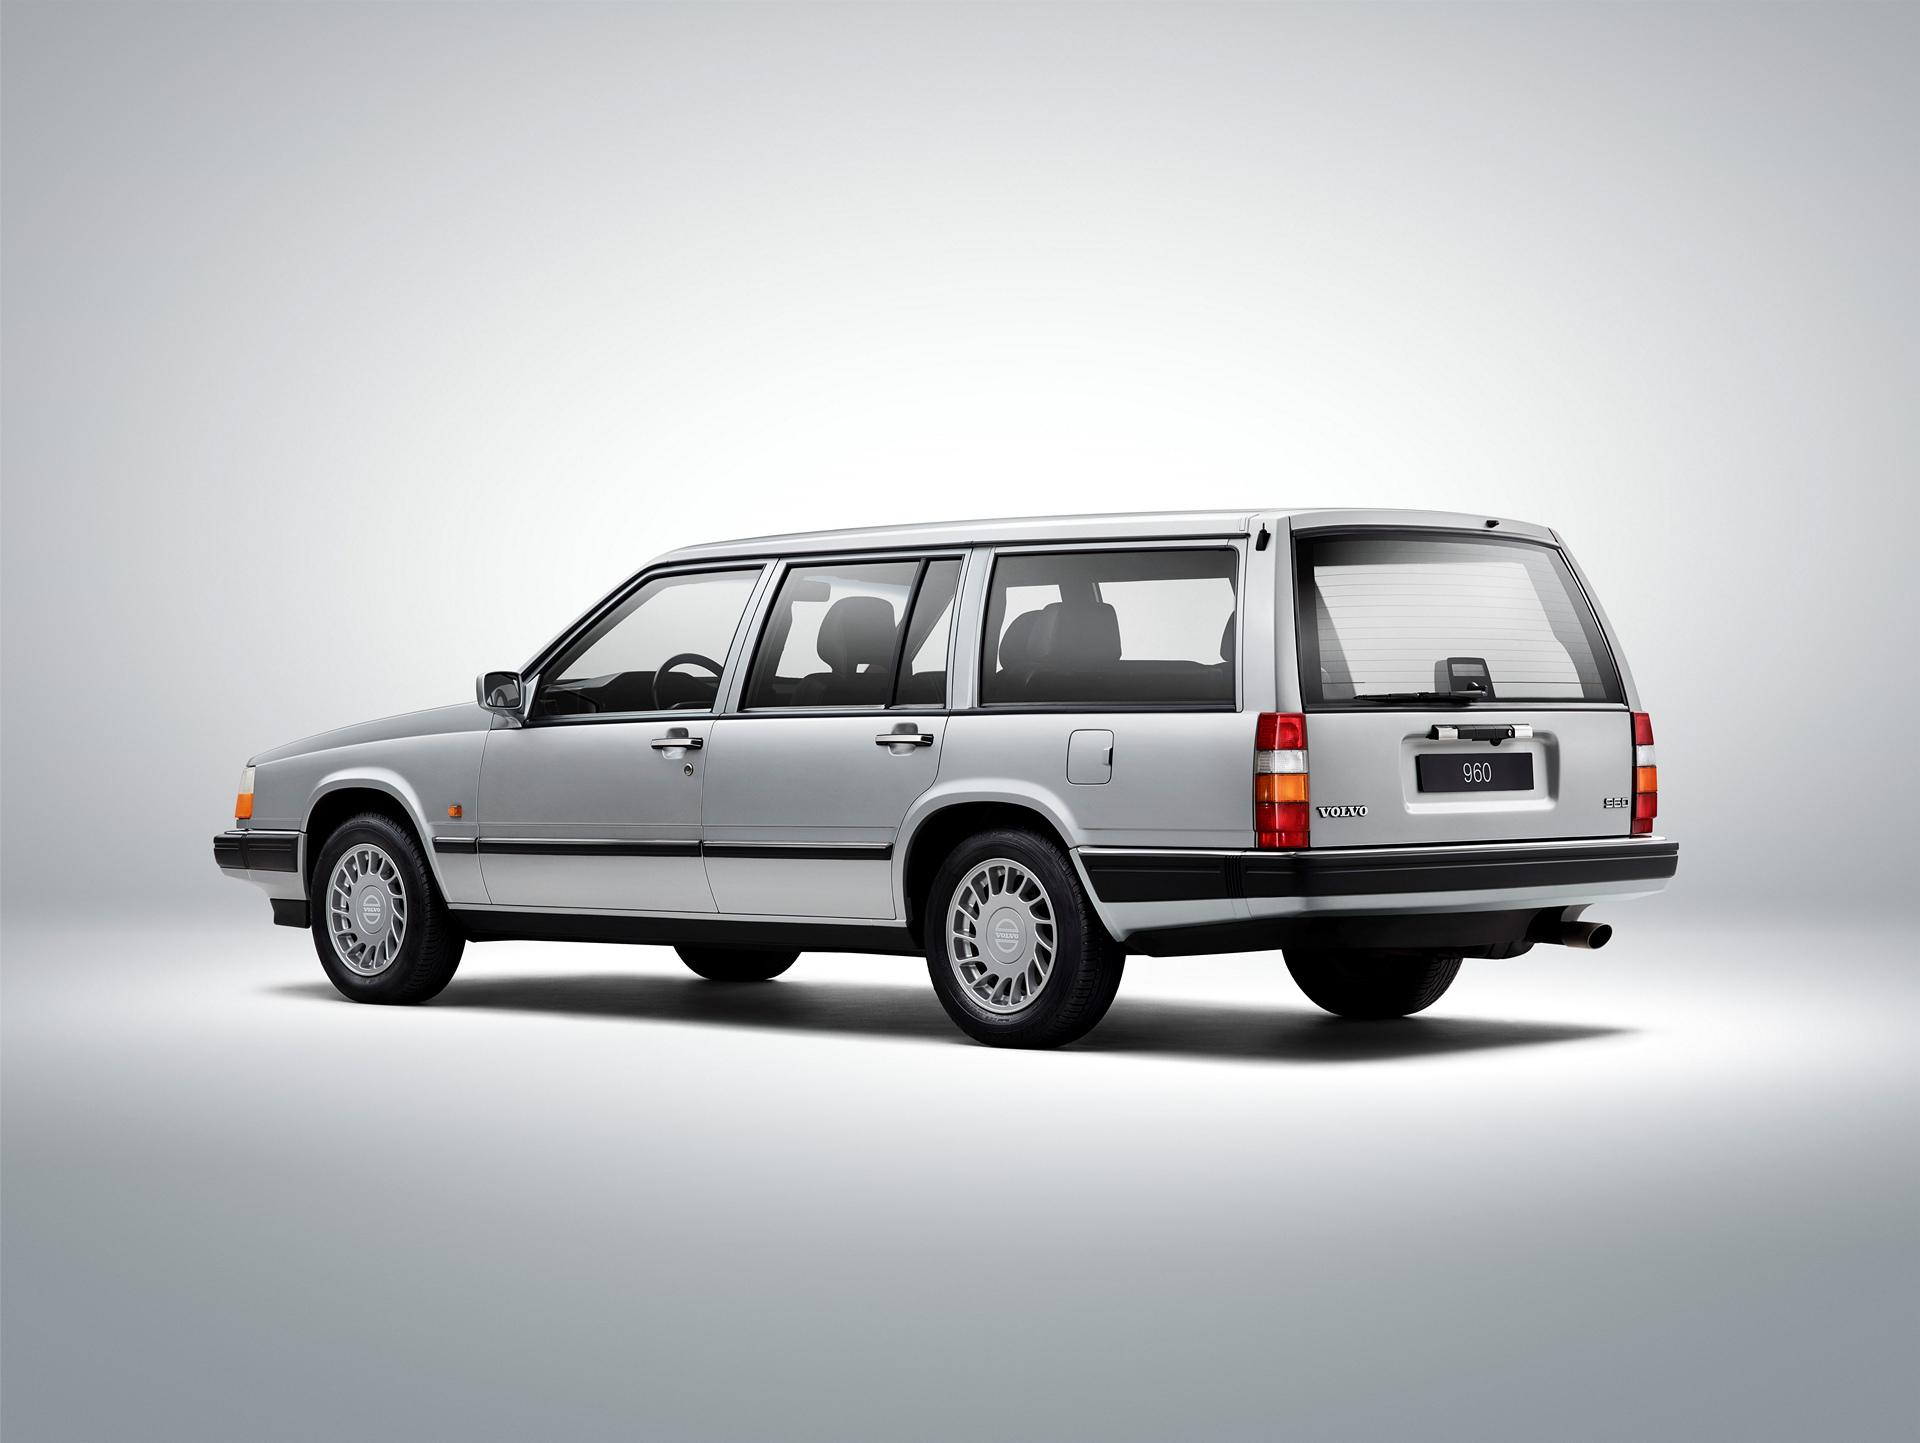 Volvo 960 © Zhejiang Geely Holding Group Co., Ltd